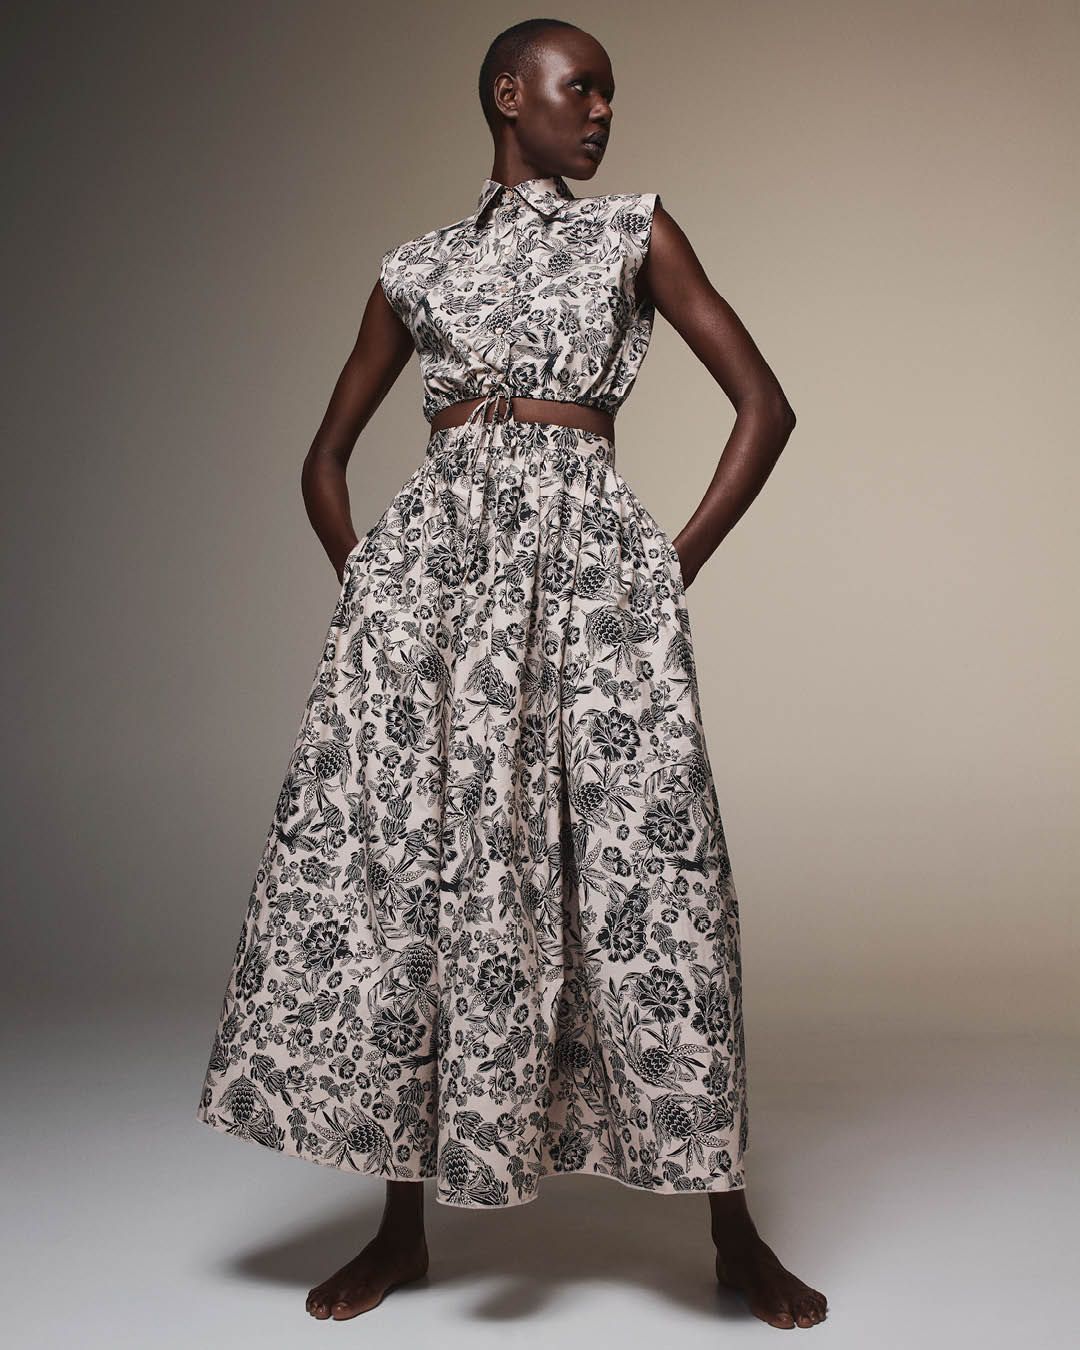 Ajak Deng standing with hands in pockets and head turned wearing a matching grey floral cropped shirt and long skirt